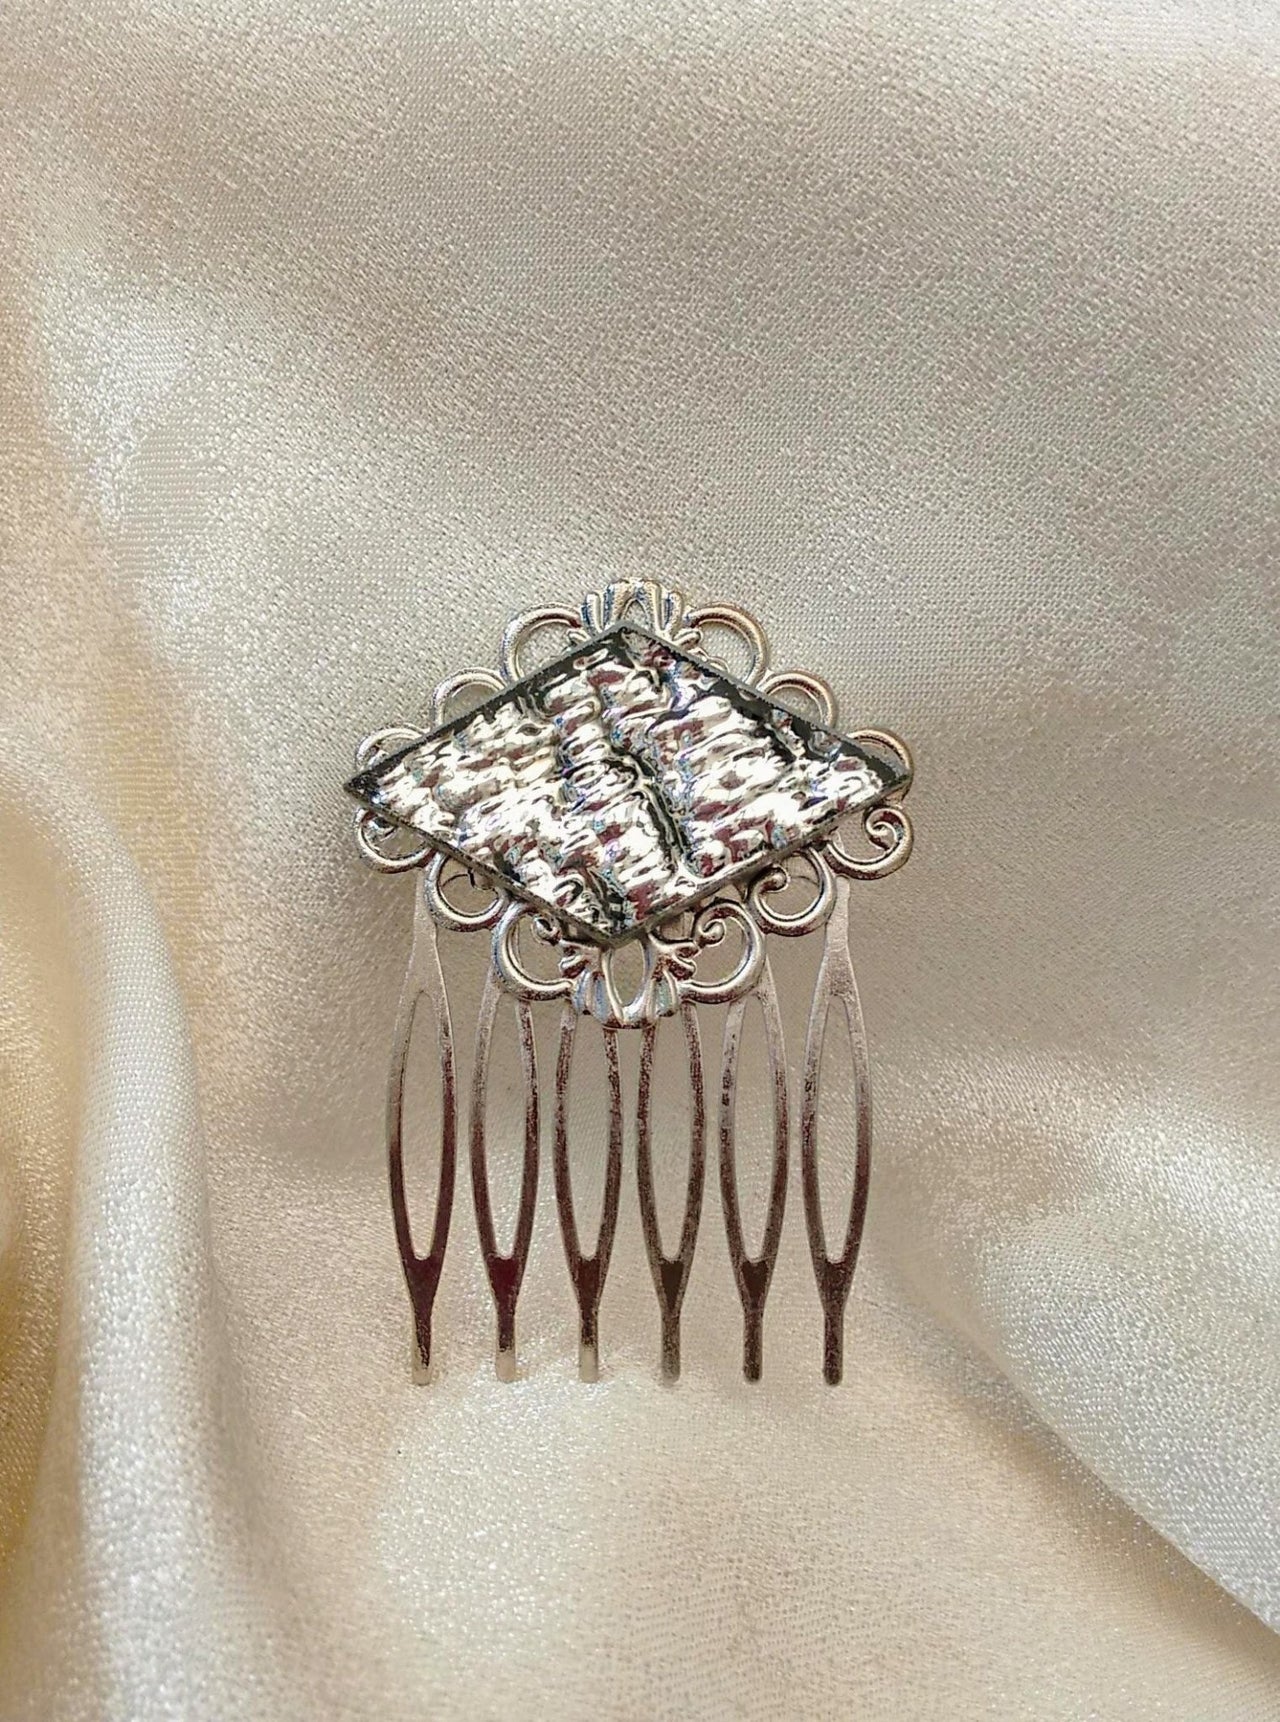 Handcrafted silver granite mirror glass hair comb